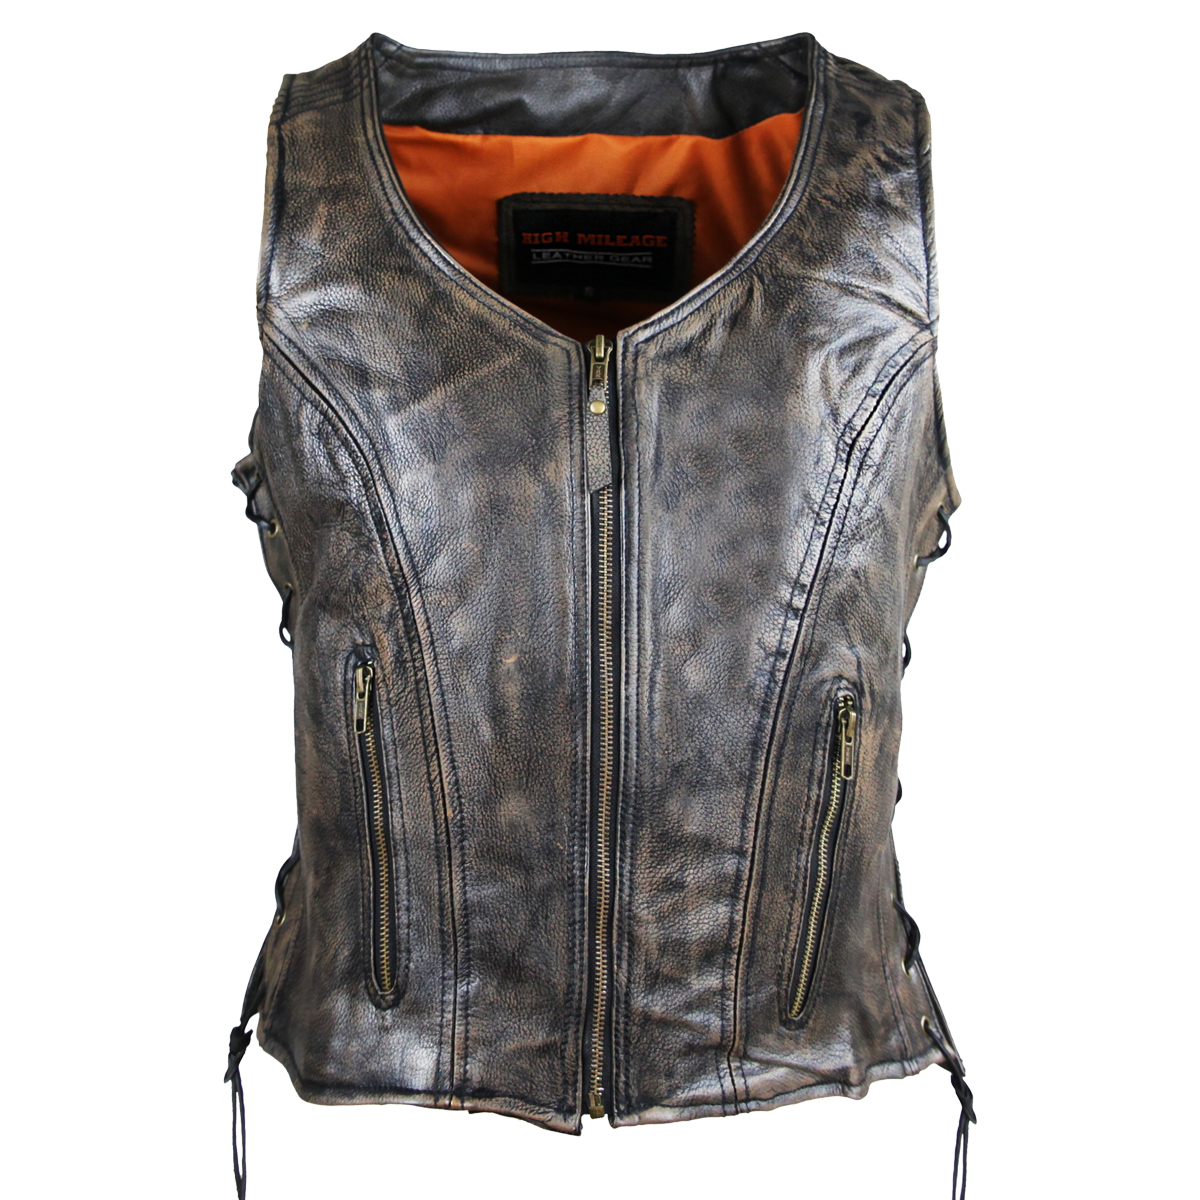 Vance Leather High Mileage Ladies Distressed Brown Lace Side Vest